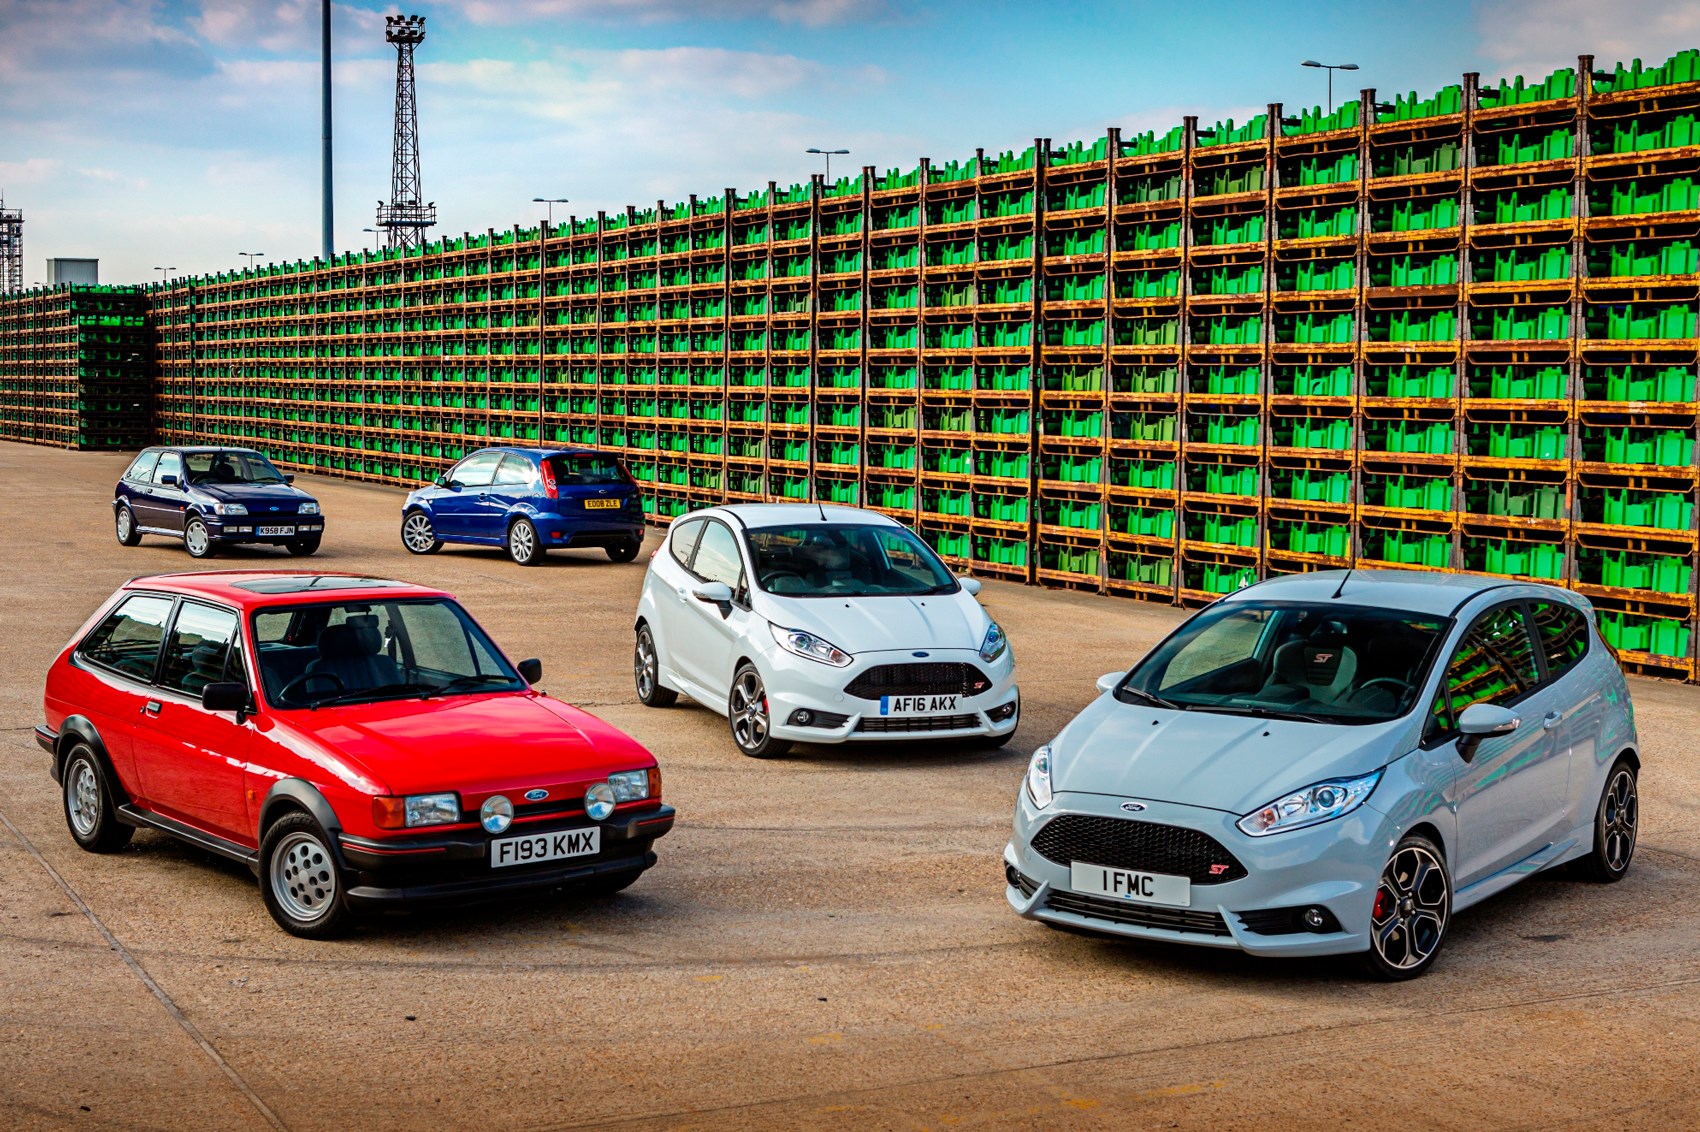 The New Fiesta ST Would Make For A Chic Cabrio, But Would Anyone Buy It?